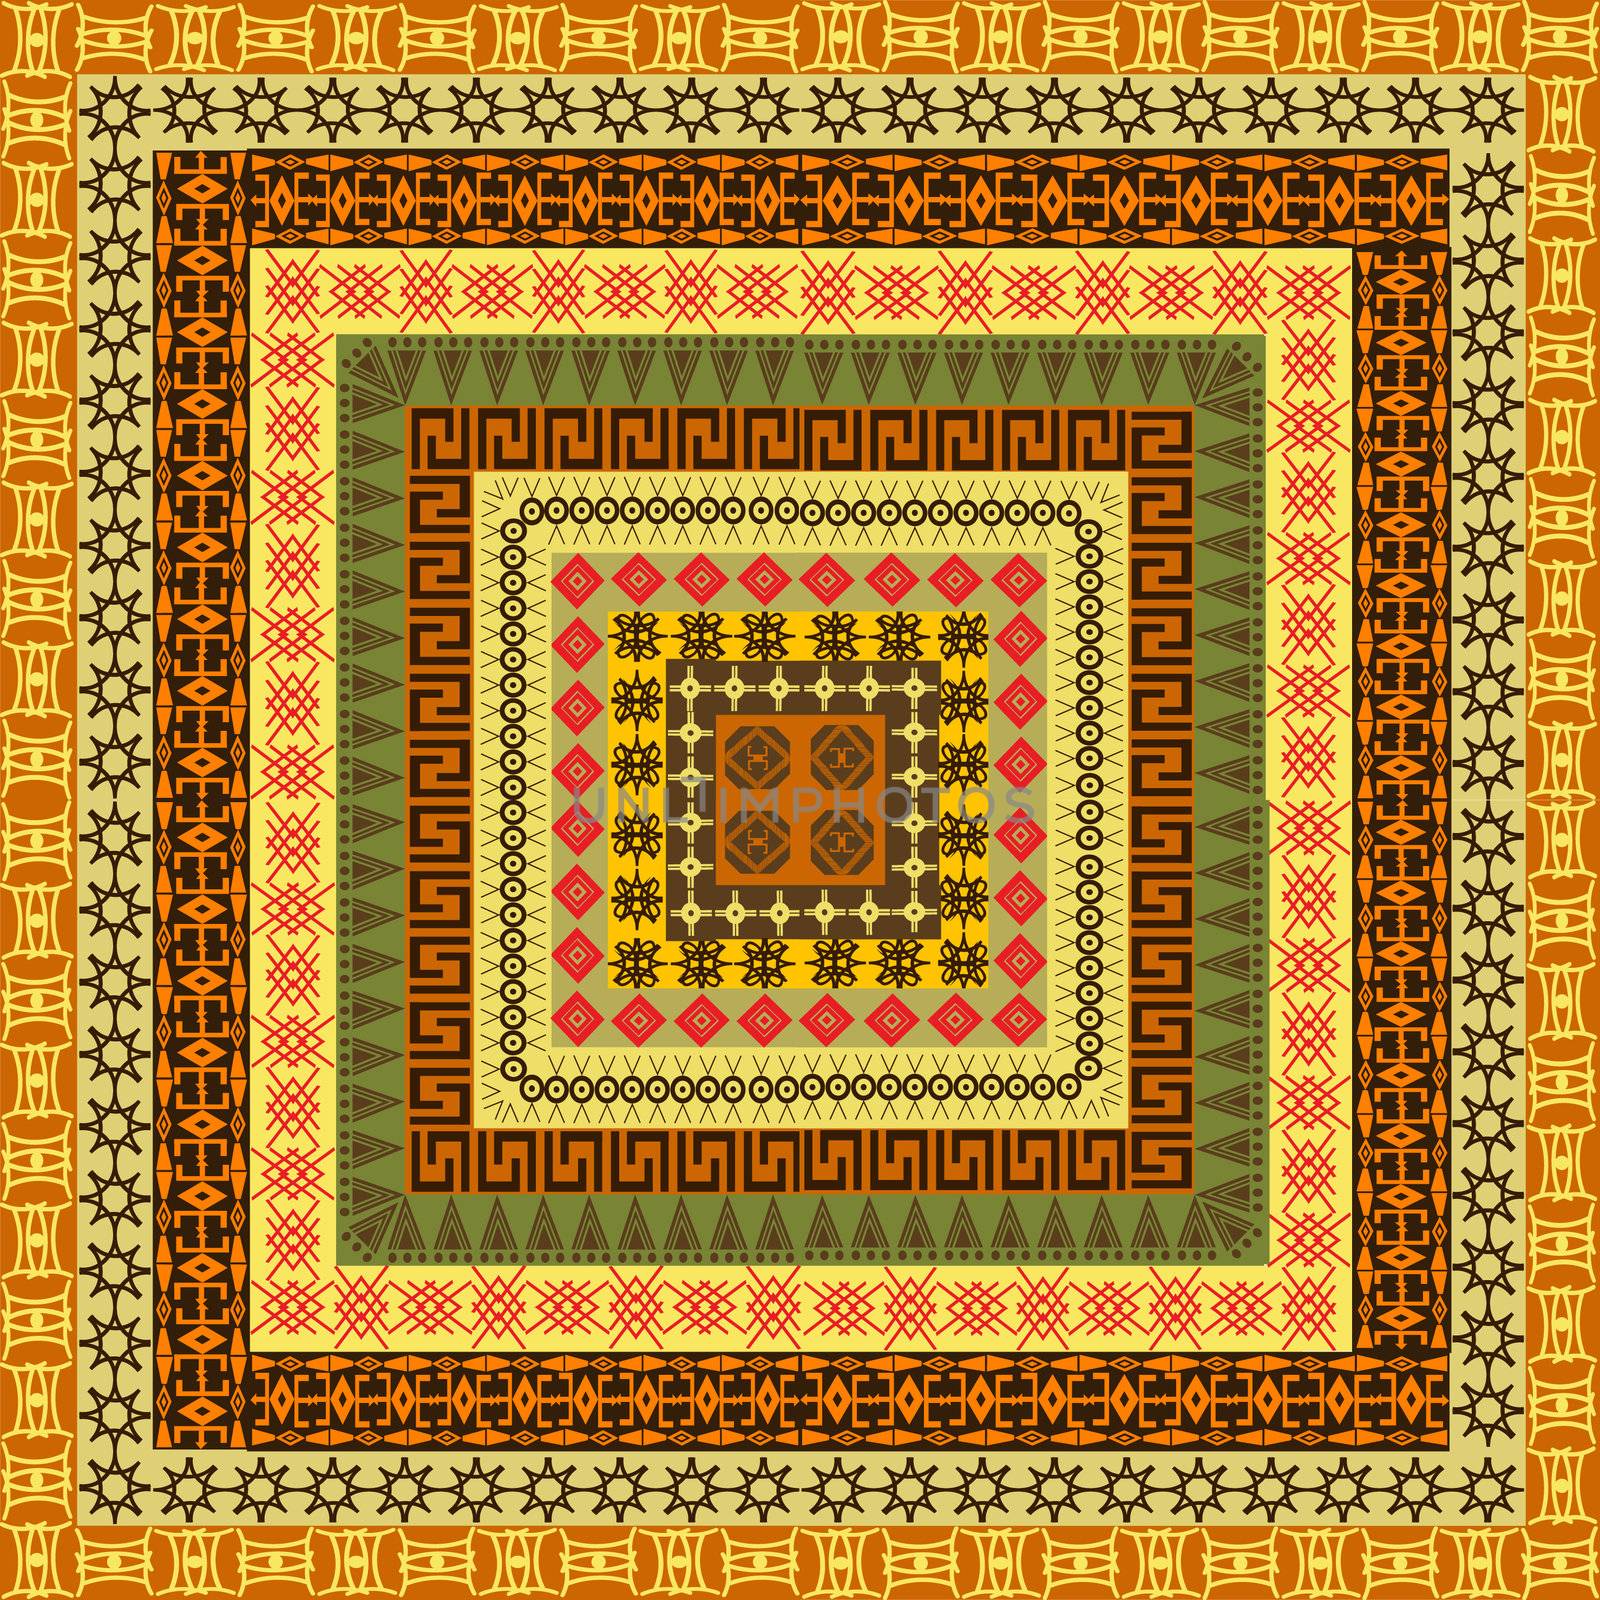 Pattern with ethnic African motifs by hibrida13